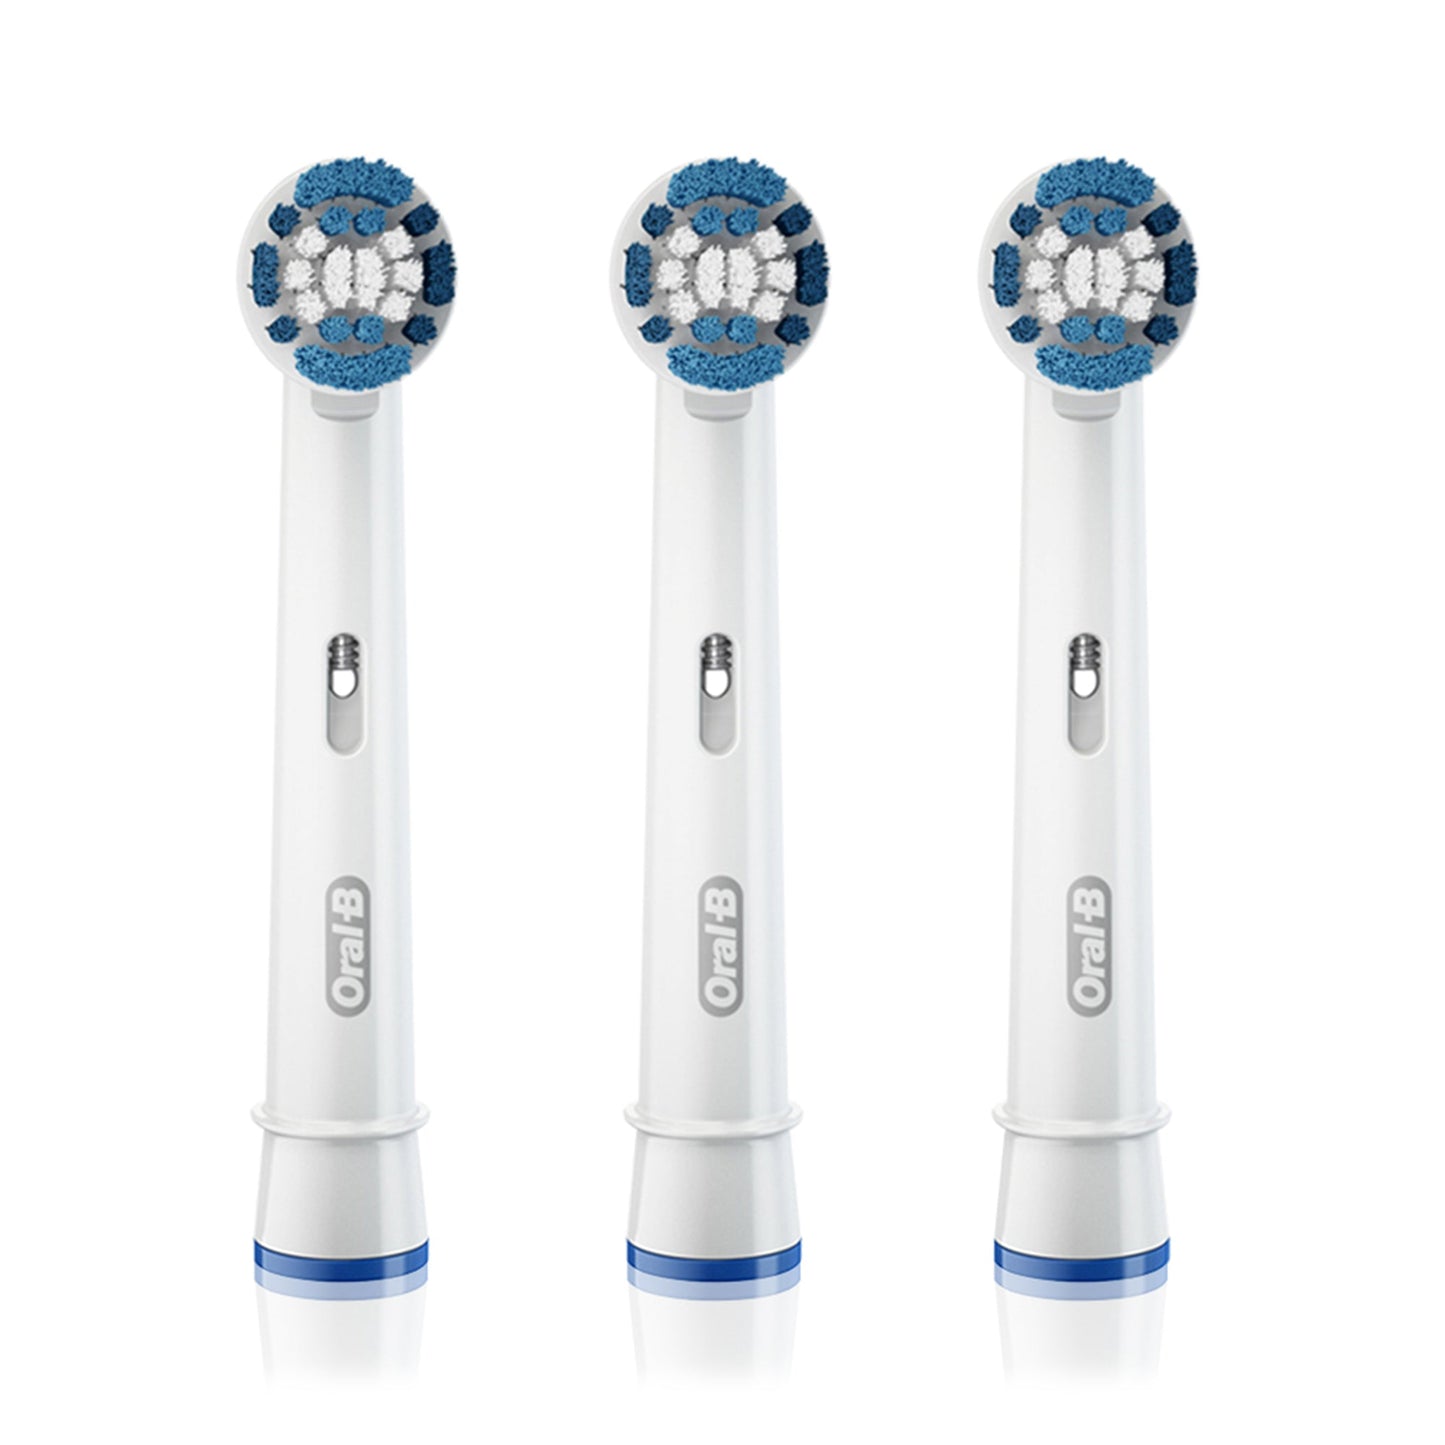 Oral-B Precision Clean Replacement Electric Toothbrush Head, 3 Count